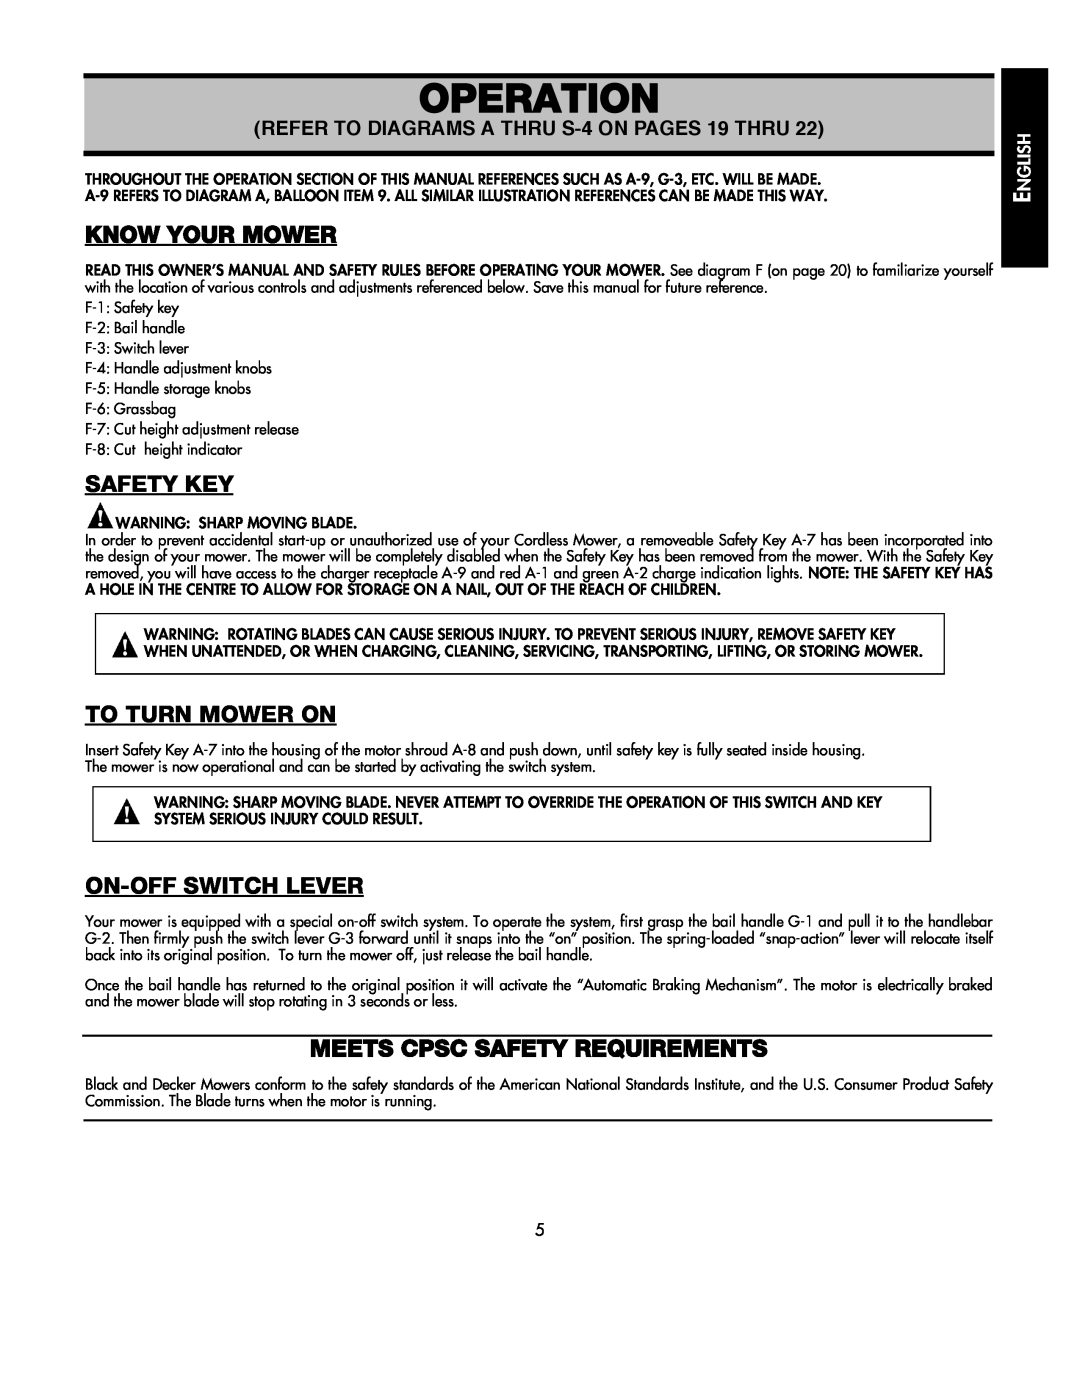 Black & Decker 598968-00 instruction manual Operation, Know Your Mower, Safety Key, To Turn Mower On, On-Off Switch Lever 